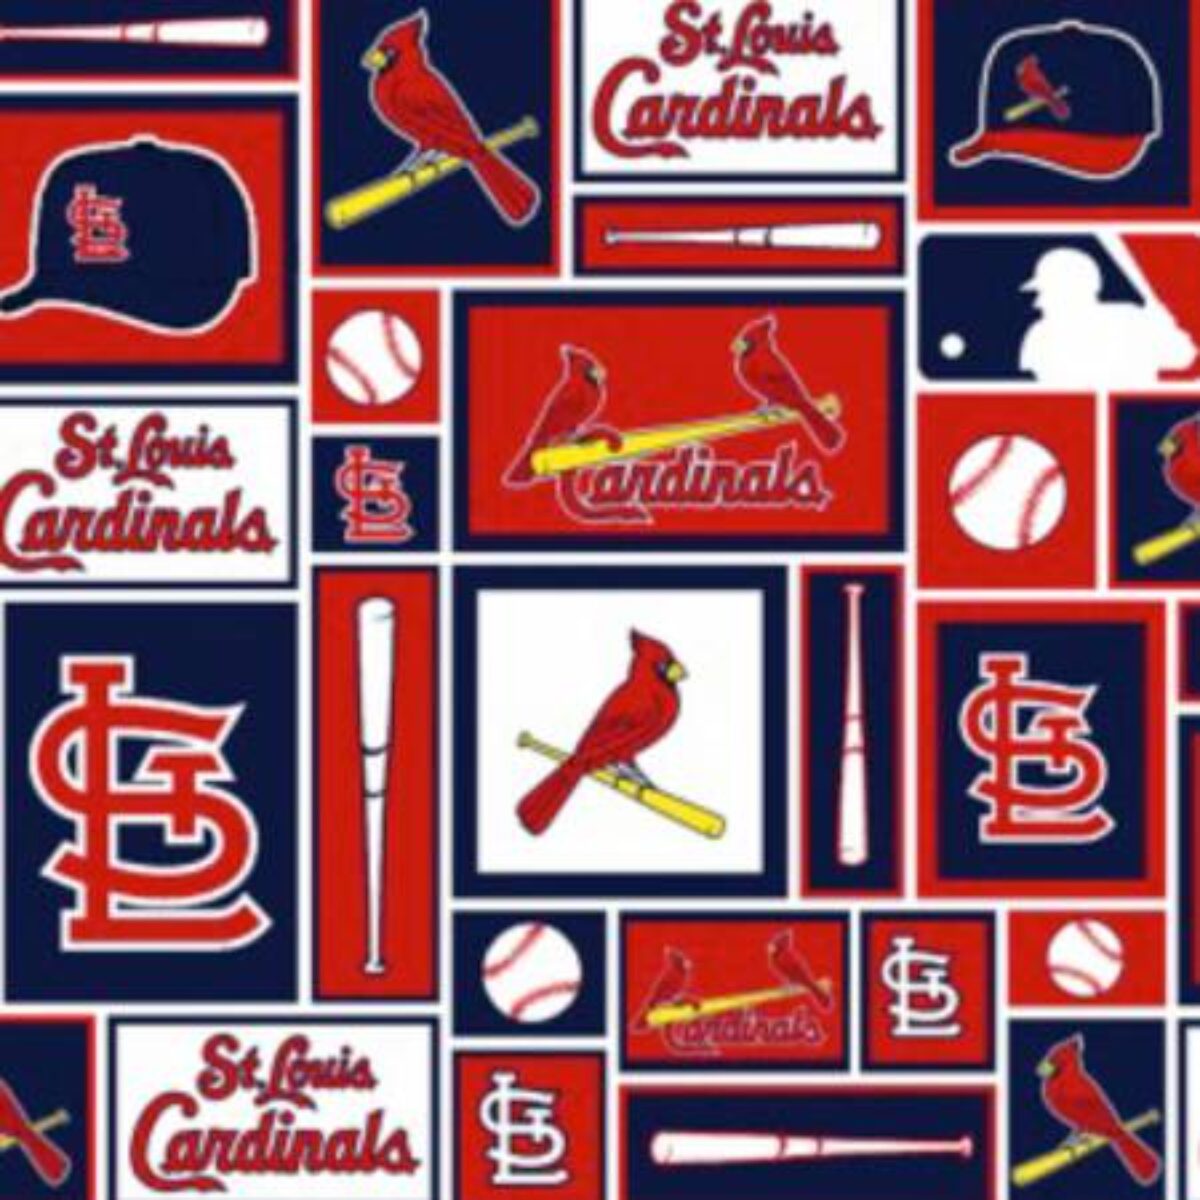 St. Louis Cardinals 58 100% Polyester Fleece Logo Sports Sewing & Craft  Fabric 10 yd By the Bolt, Red, White and Yellow 